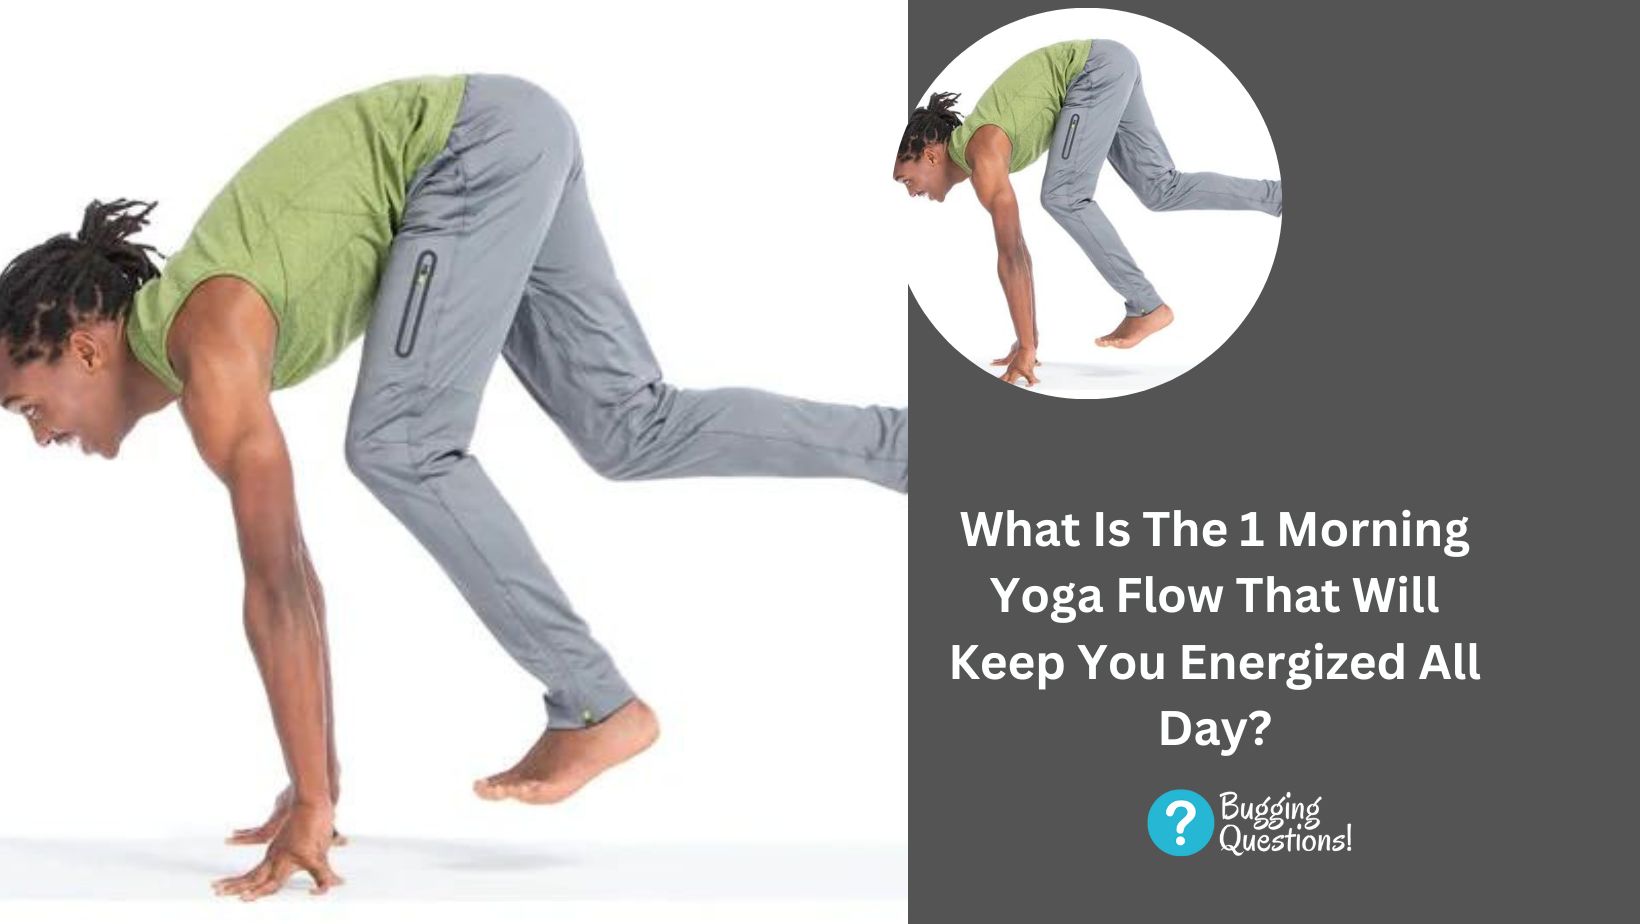 What Is The 1 Morning Yoga Flow That Will Keep You Energized All Day?